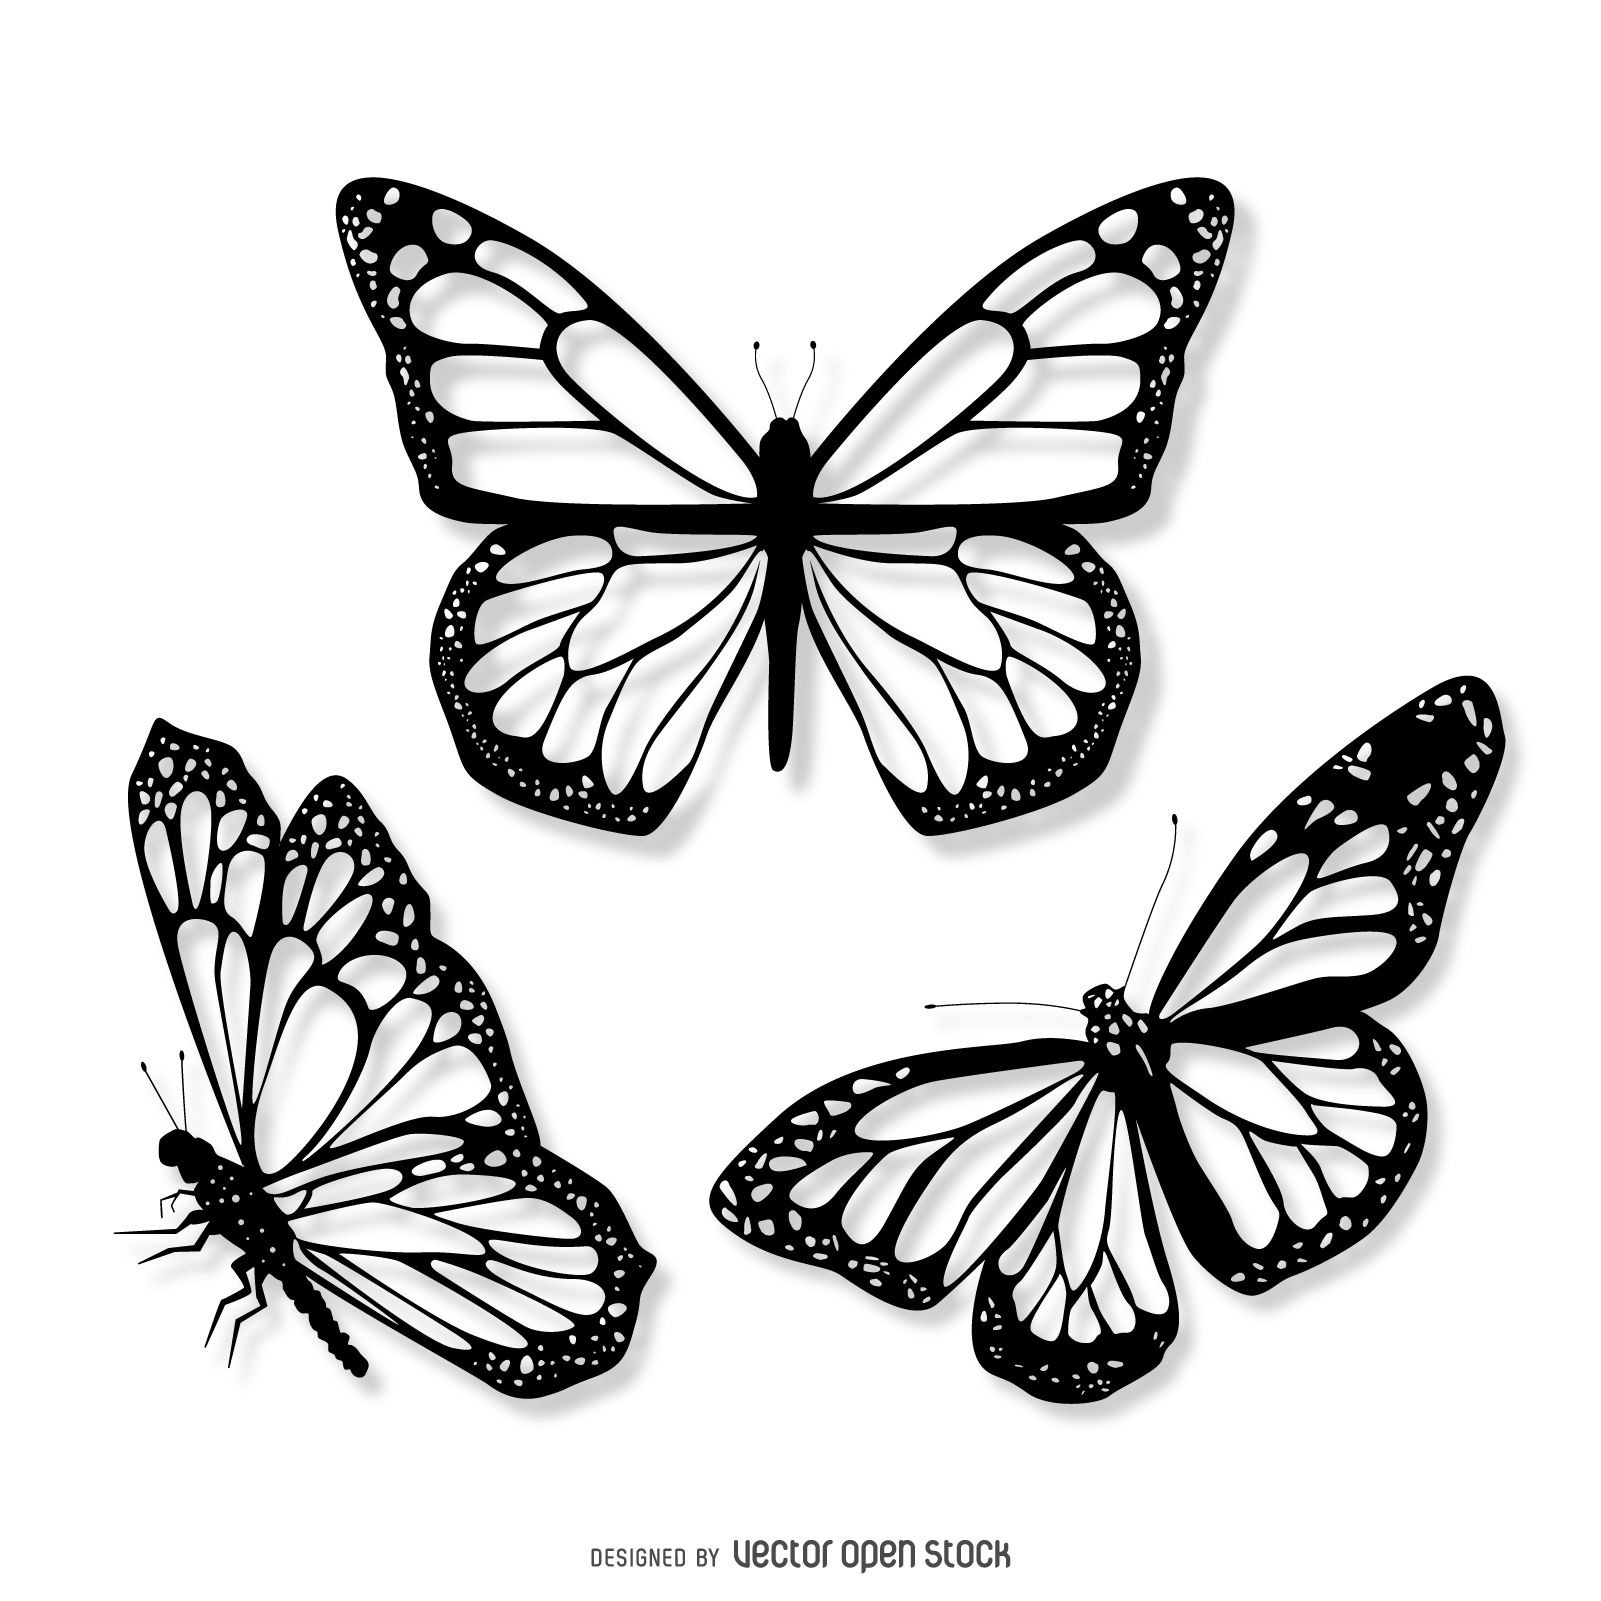 Realistic Butterfly Drawings - Realistic Butterfly Sketch. 